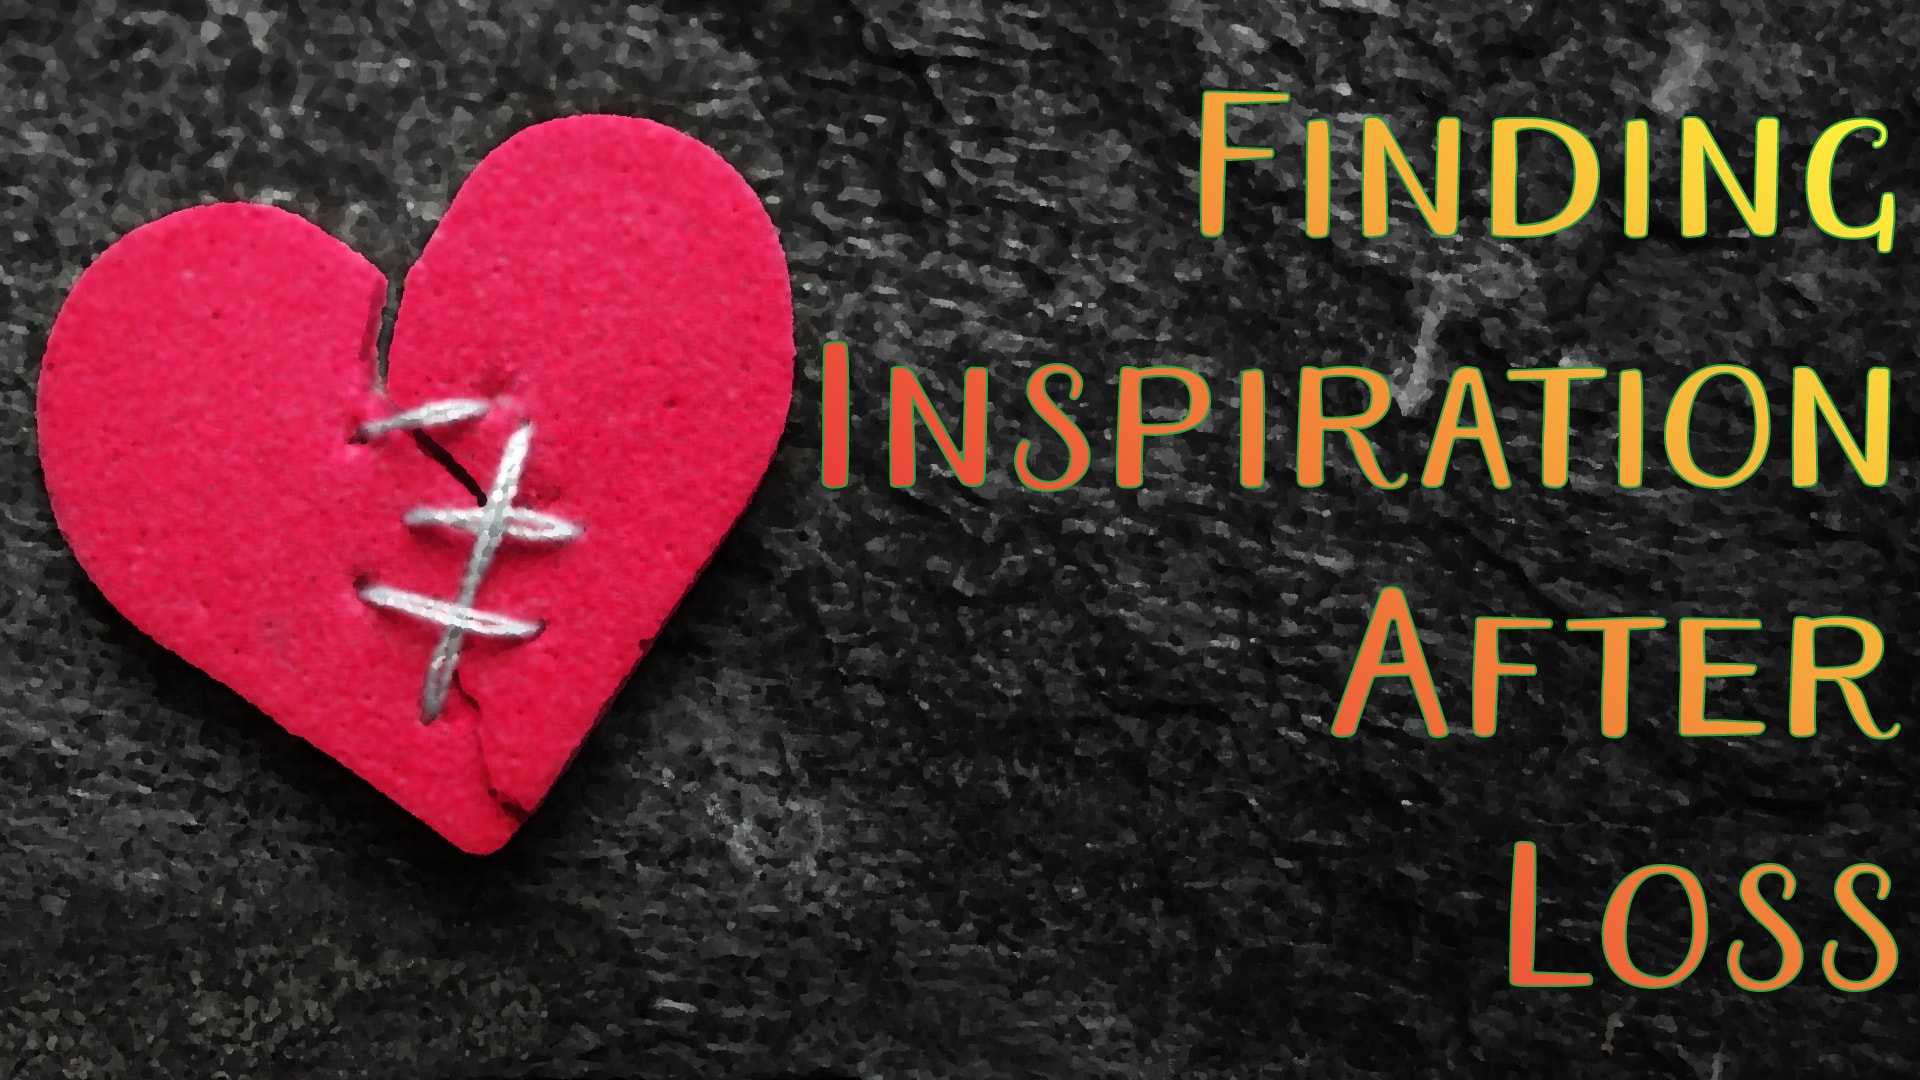 Finding Inspiration after Loss